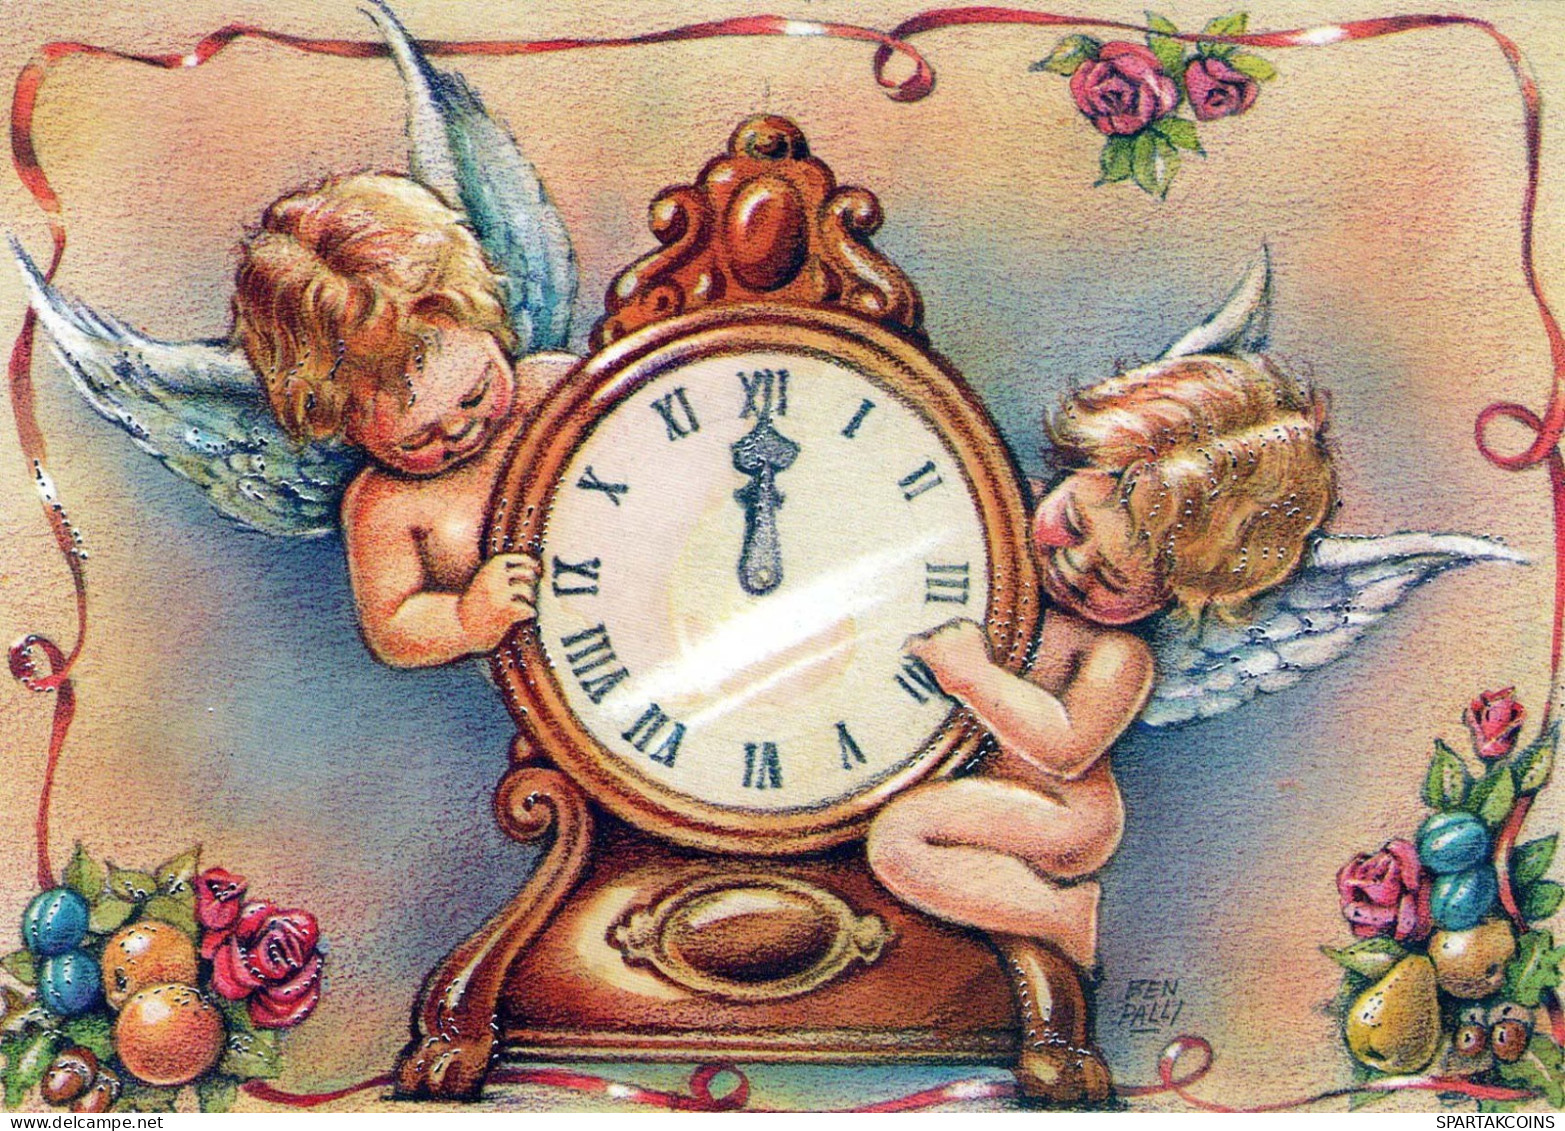 ANGEL Happy New Year Christmas TABLE CLOCK Vintage Postcard CPSM #PAT870.A - Angels